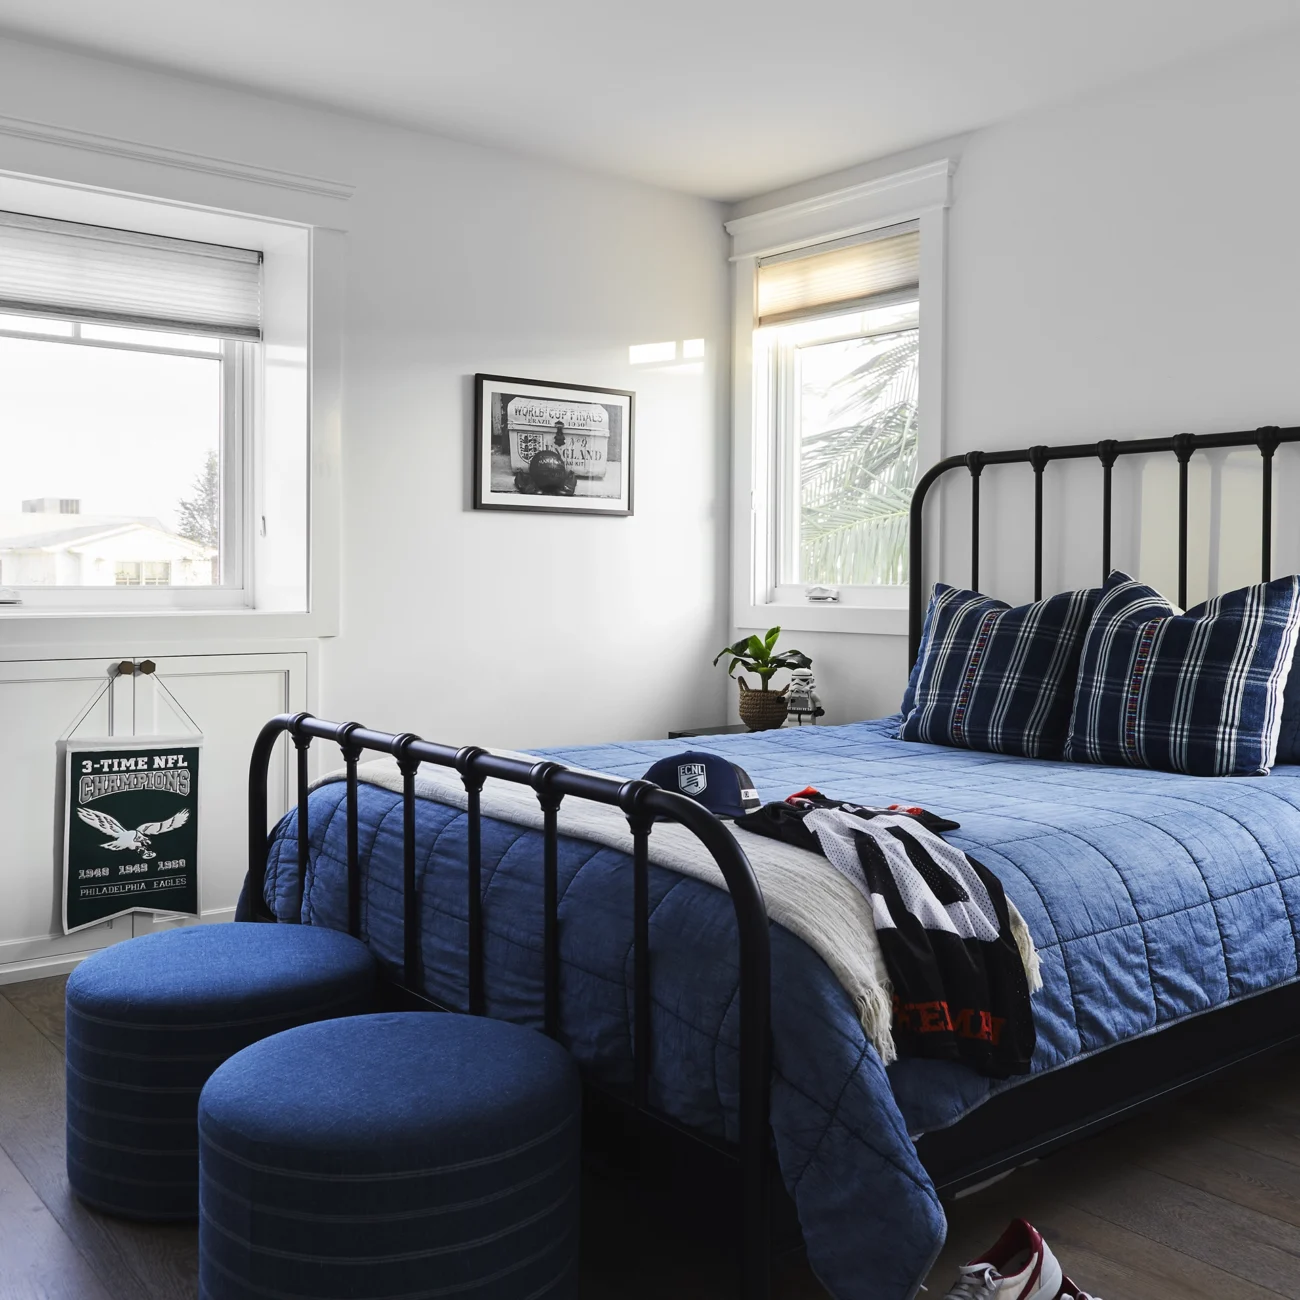 Christine Vroom-Interiors Thayer | Traditional teen bedroom with blue accents